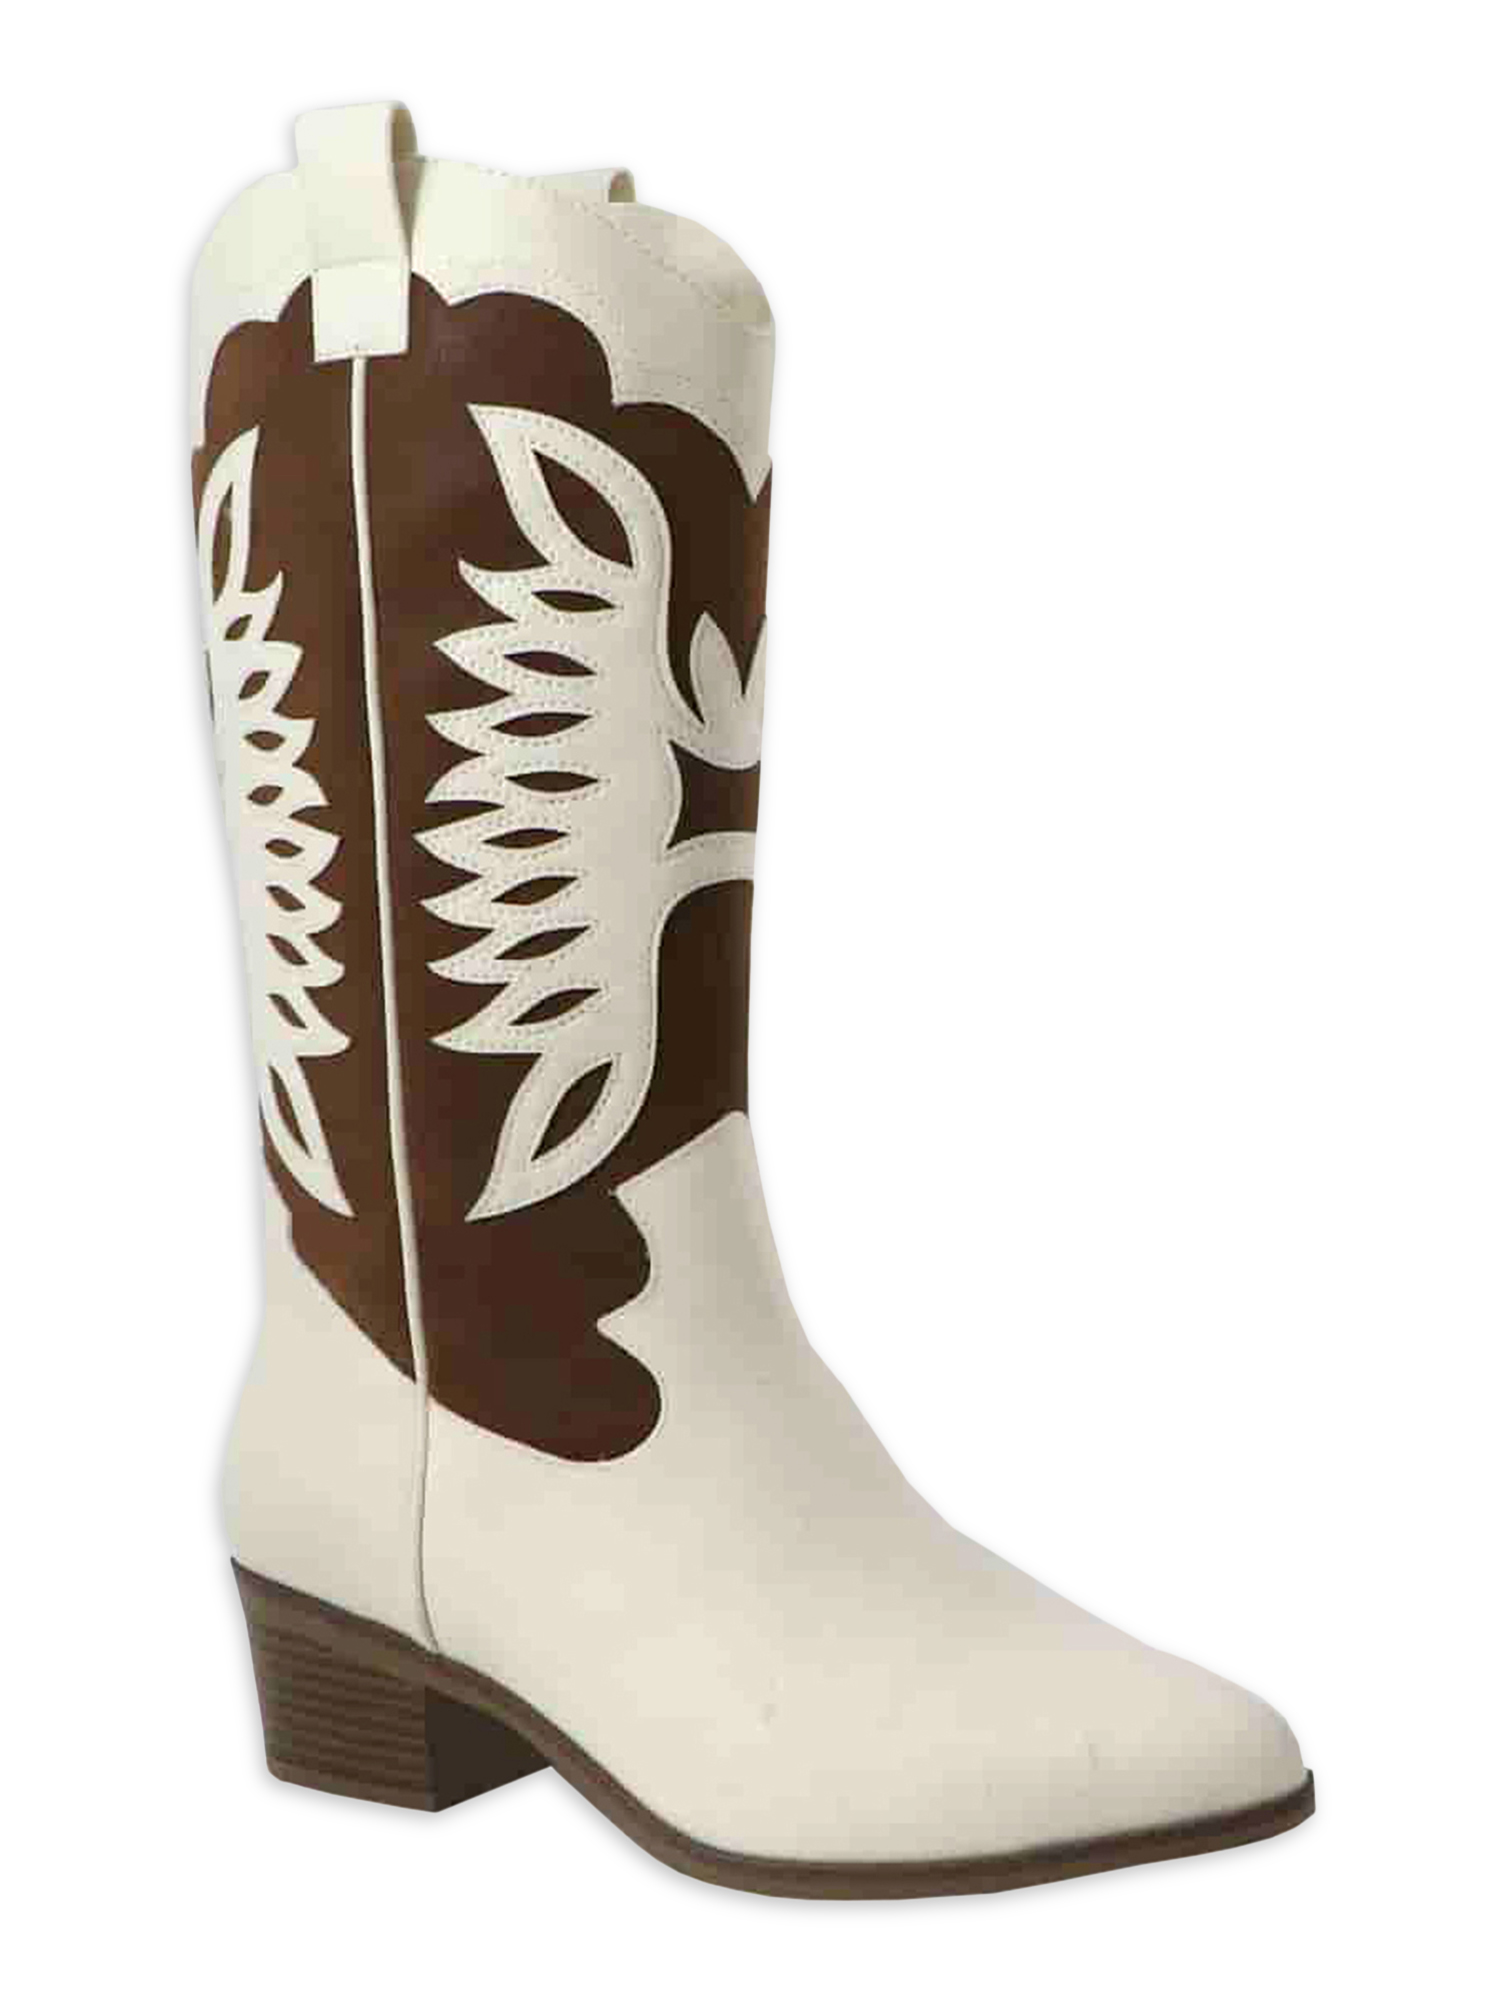 The Pioneer Woman Women's Tall Embroidered Western Boot - image 1 of 6